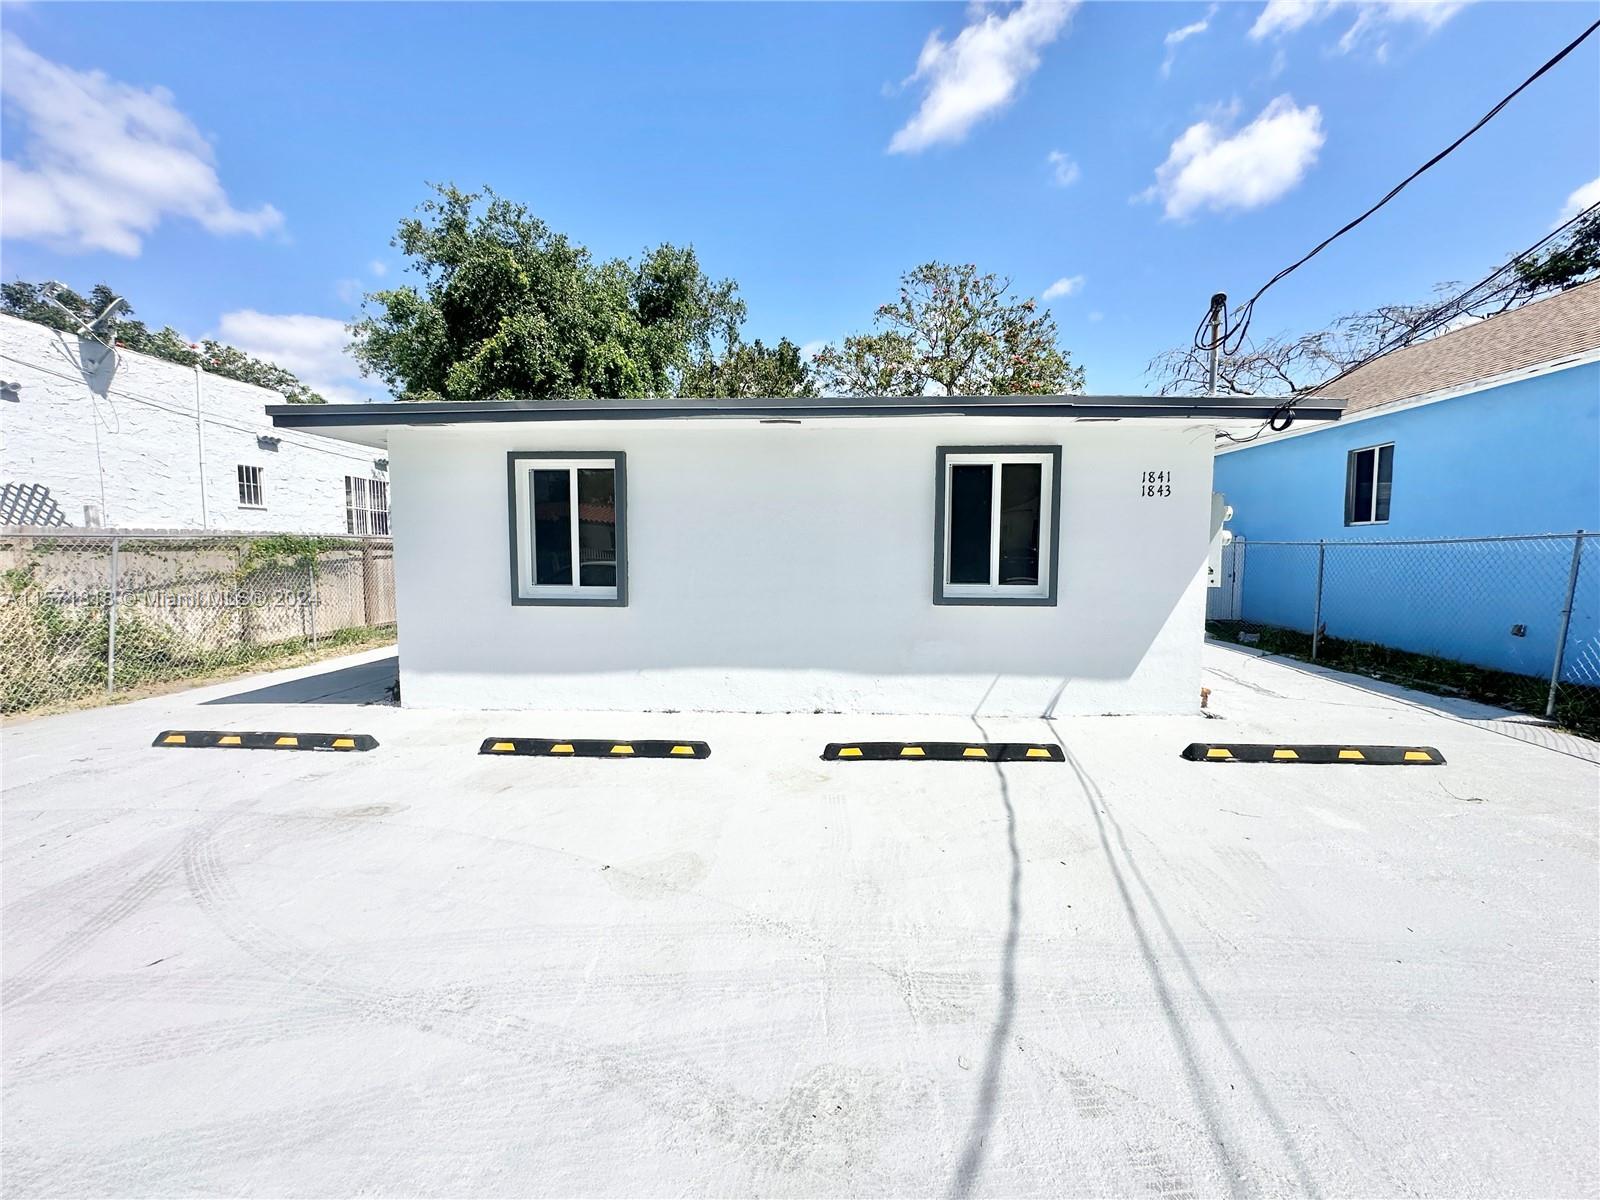 Photo of 1841 NW 55th St #1841 in Miami, FL